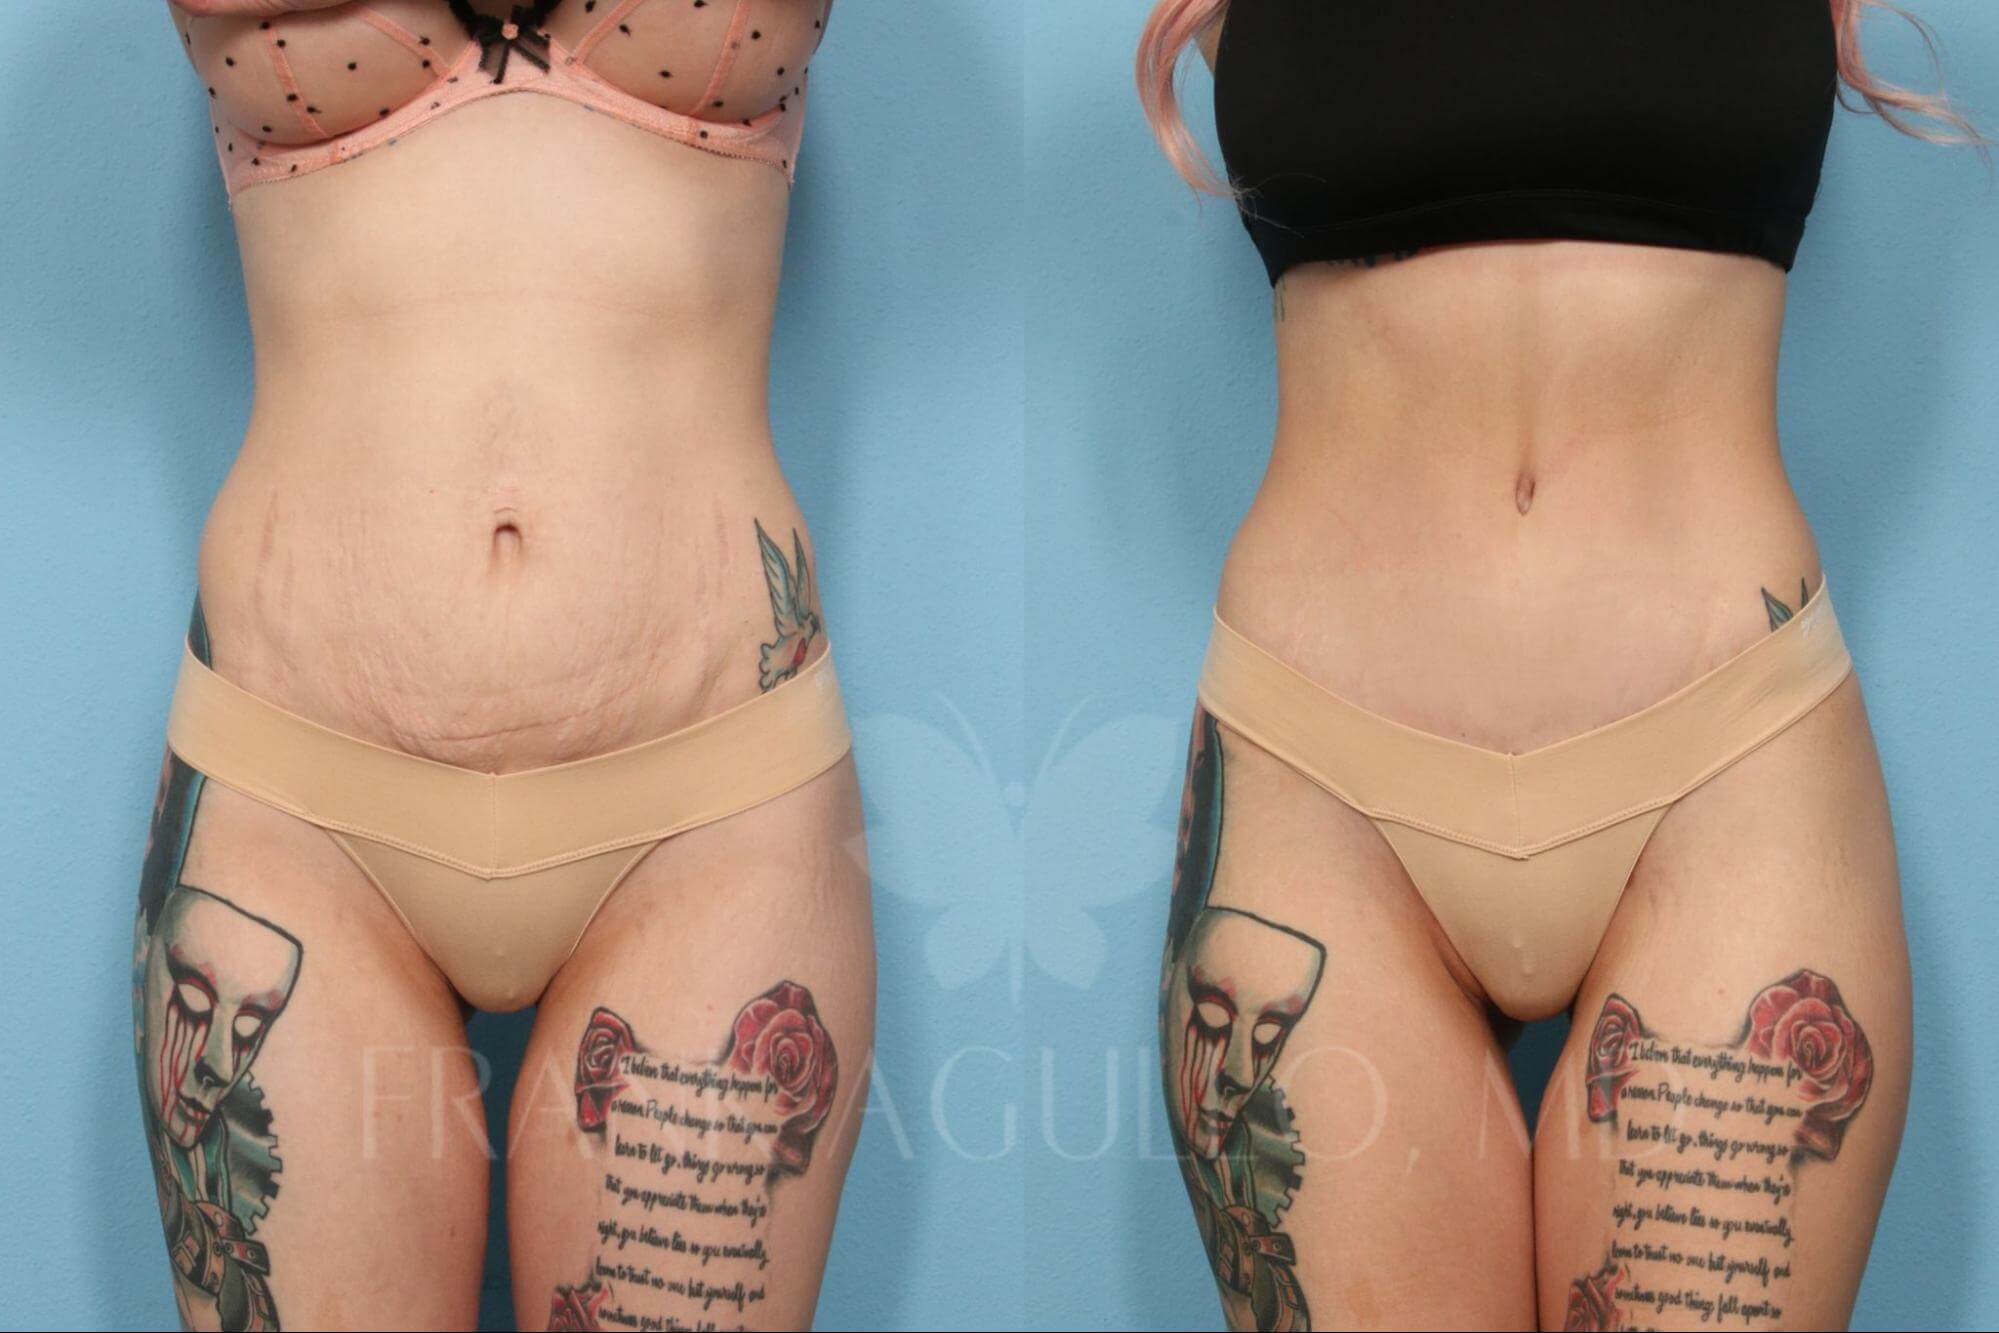 Is Mini Tummy Tuck Better for a Fit Girl